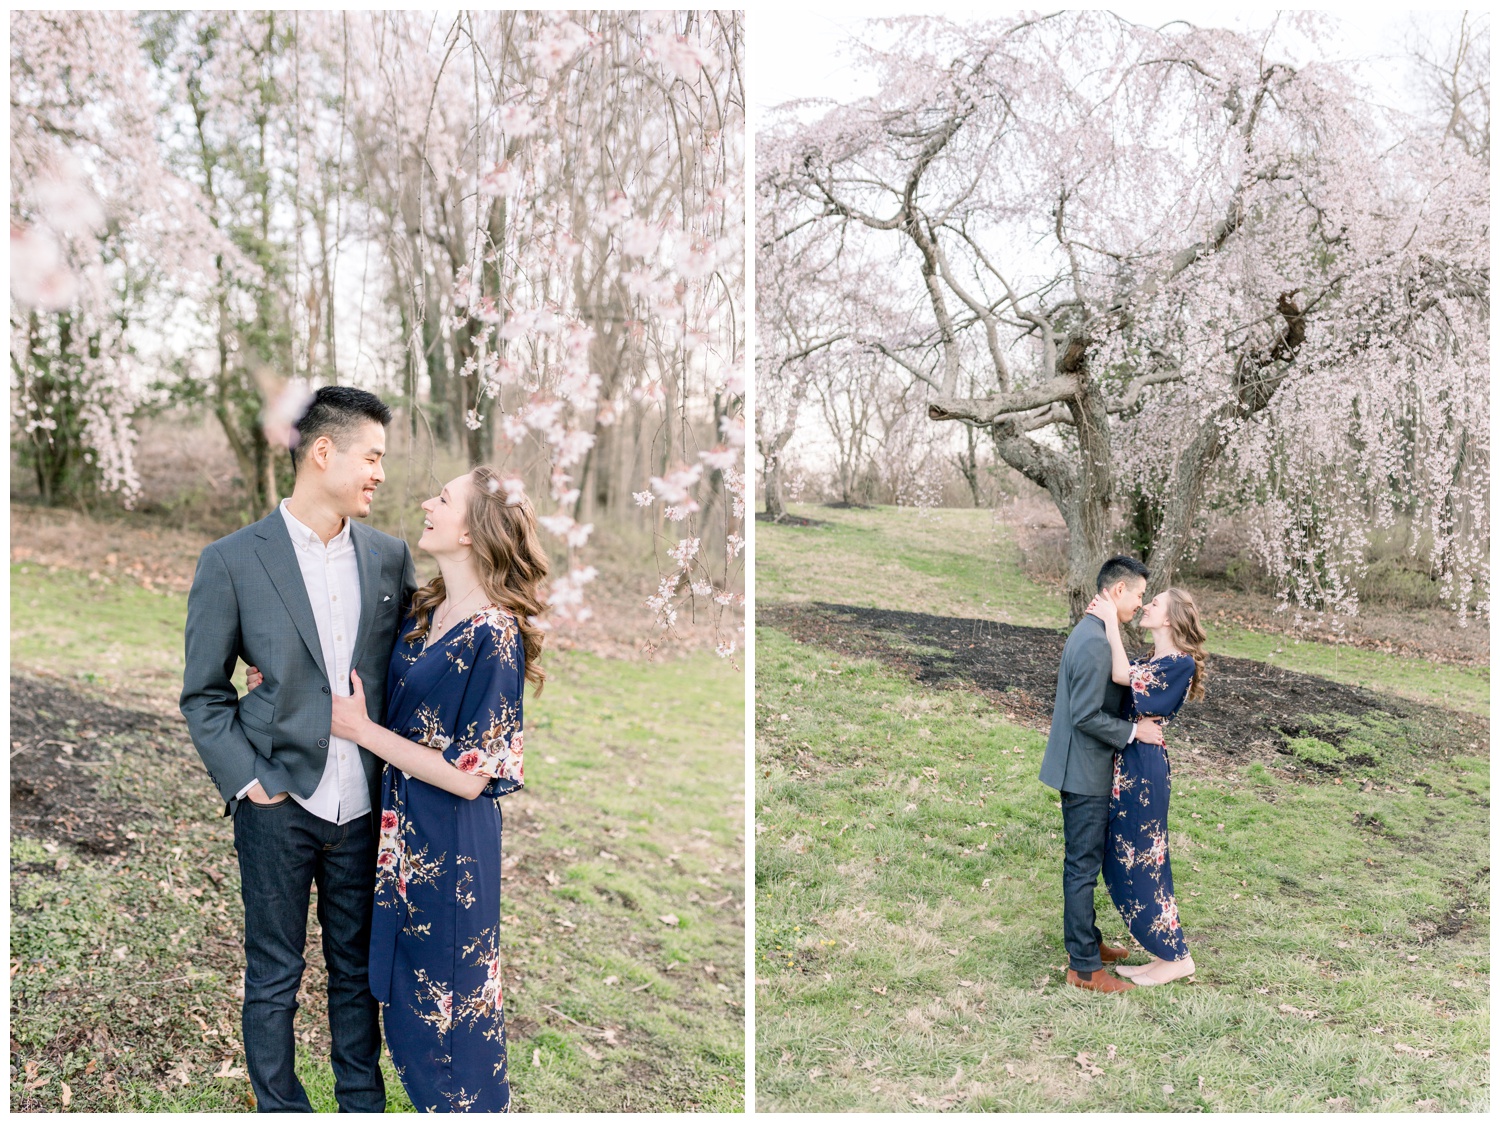 Engaged Couple with Weeping Cherry Blossoms at Ault Park in Spring